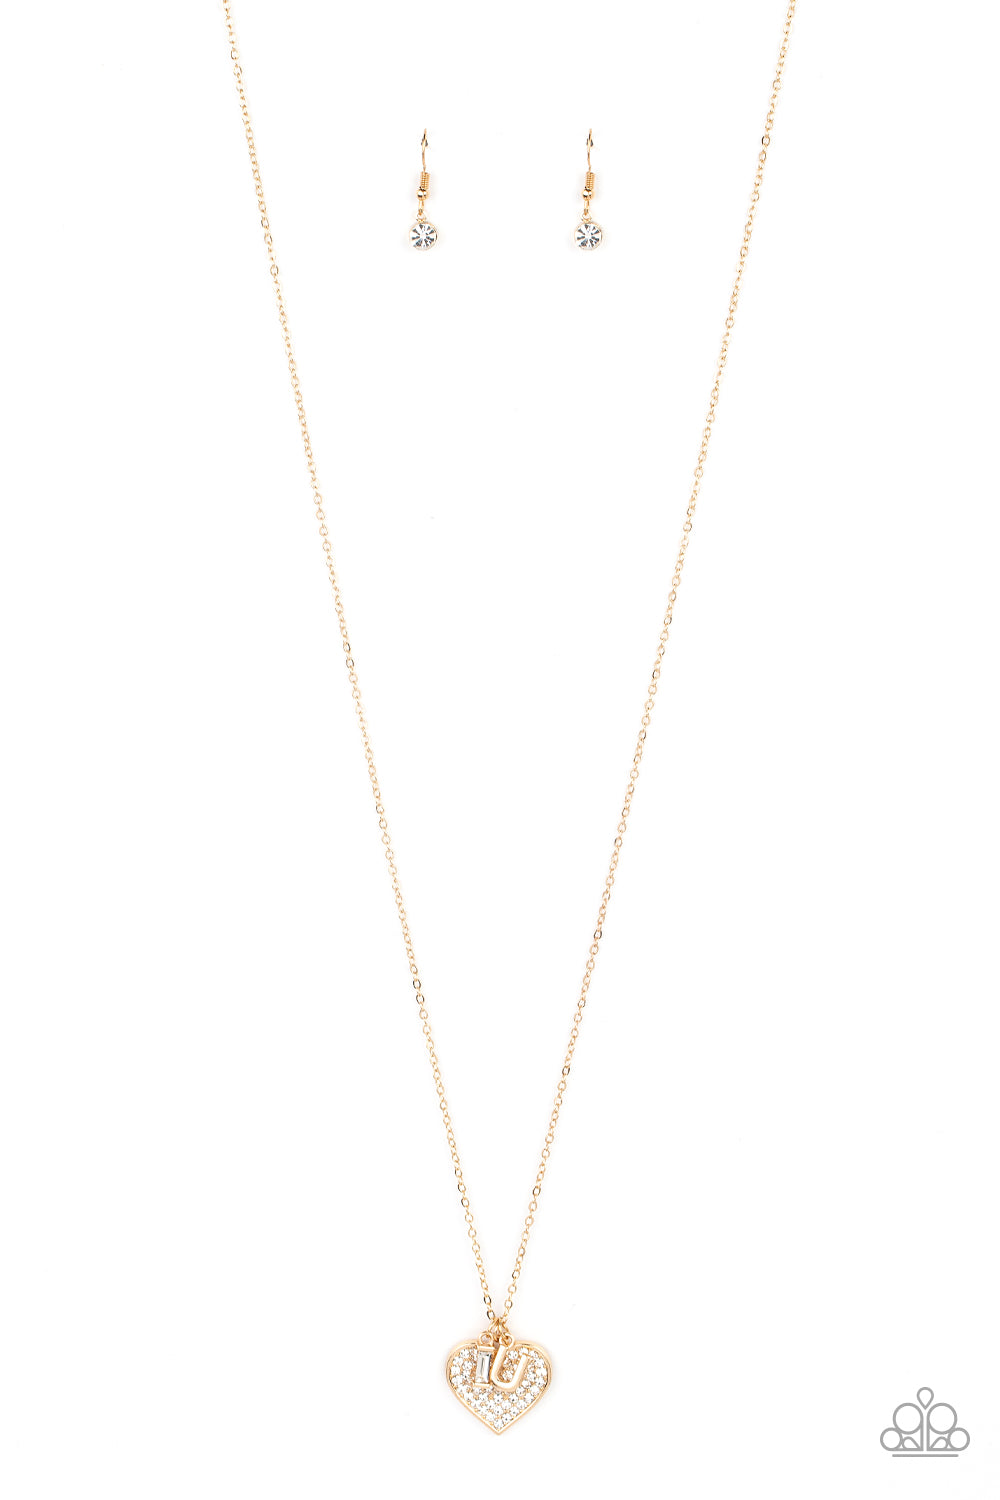 Letters of Love Gold Necklace